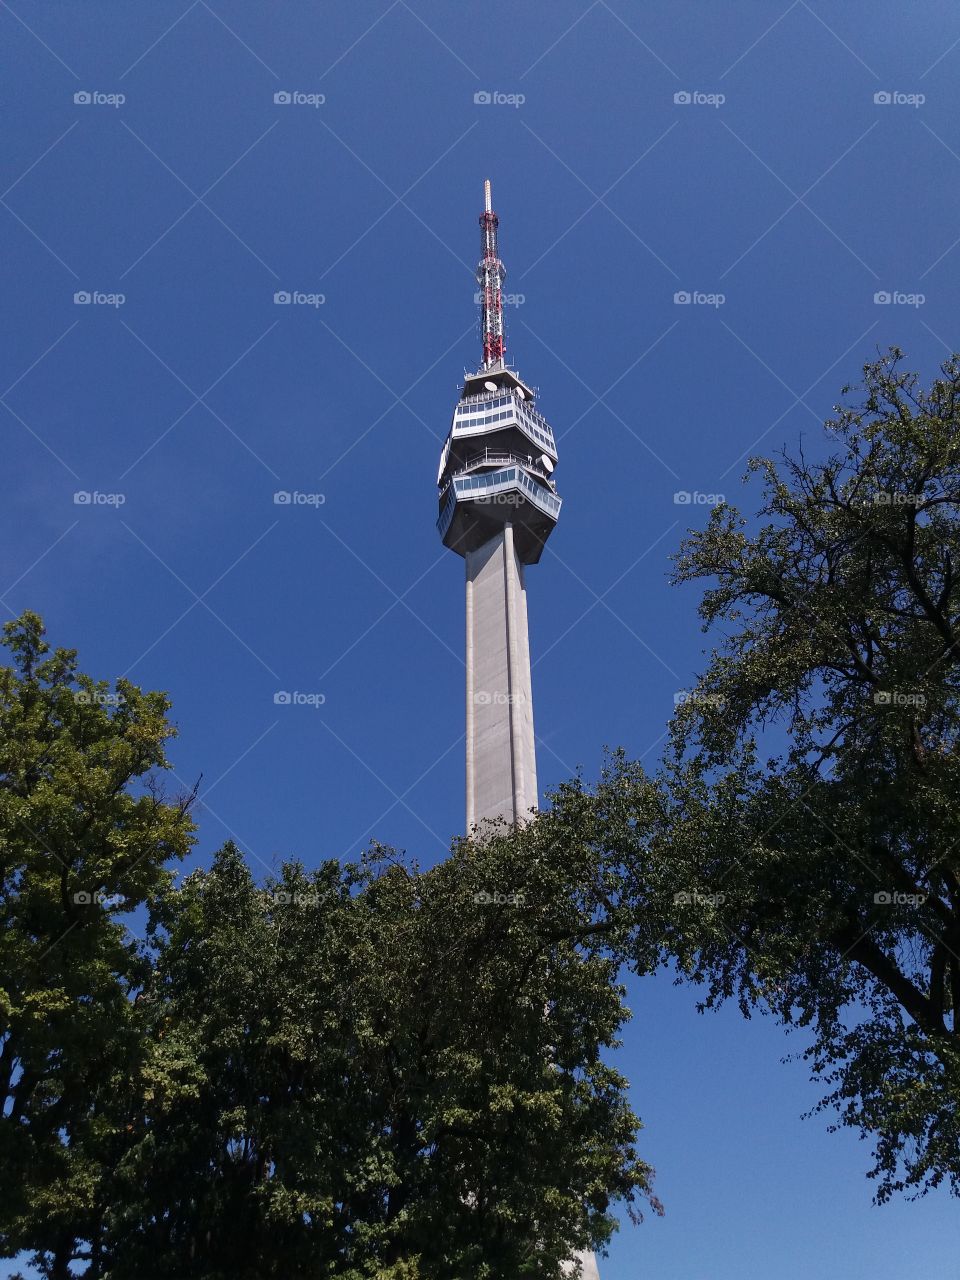 No Person, Sky, Tower, Outdoors, Architecture